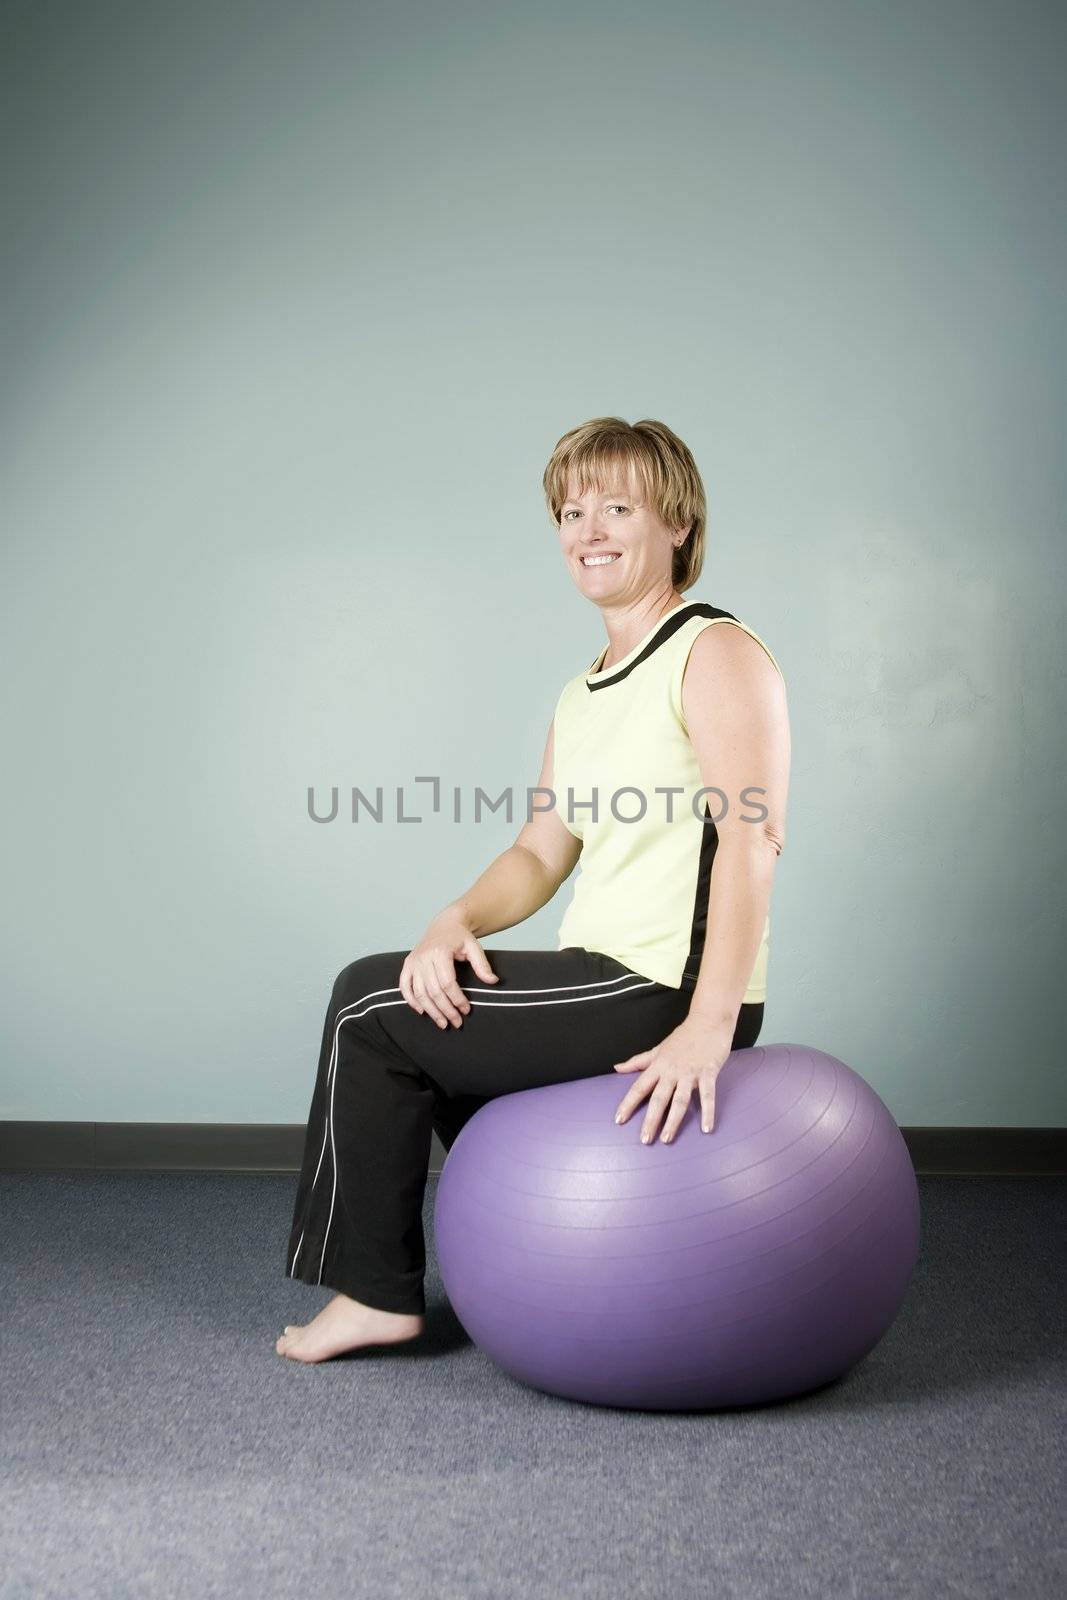 Portrait of a Pretty Woman Sitting on an Exercise Ball